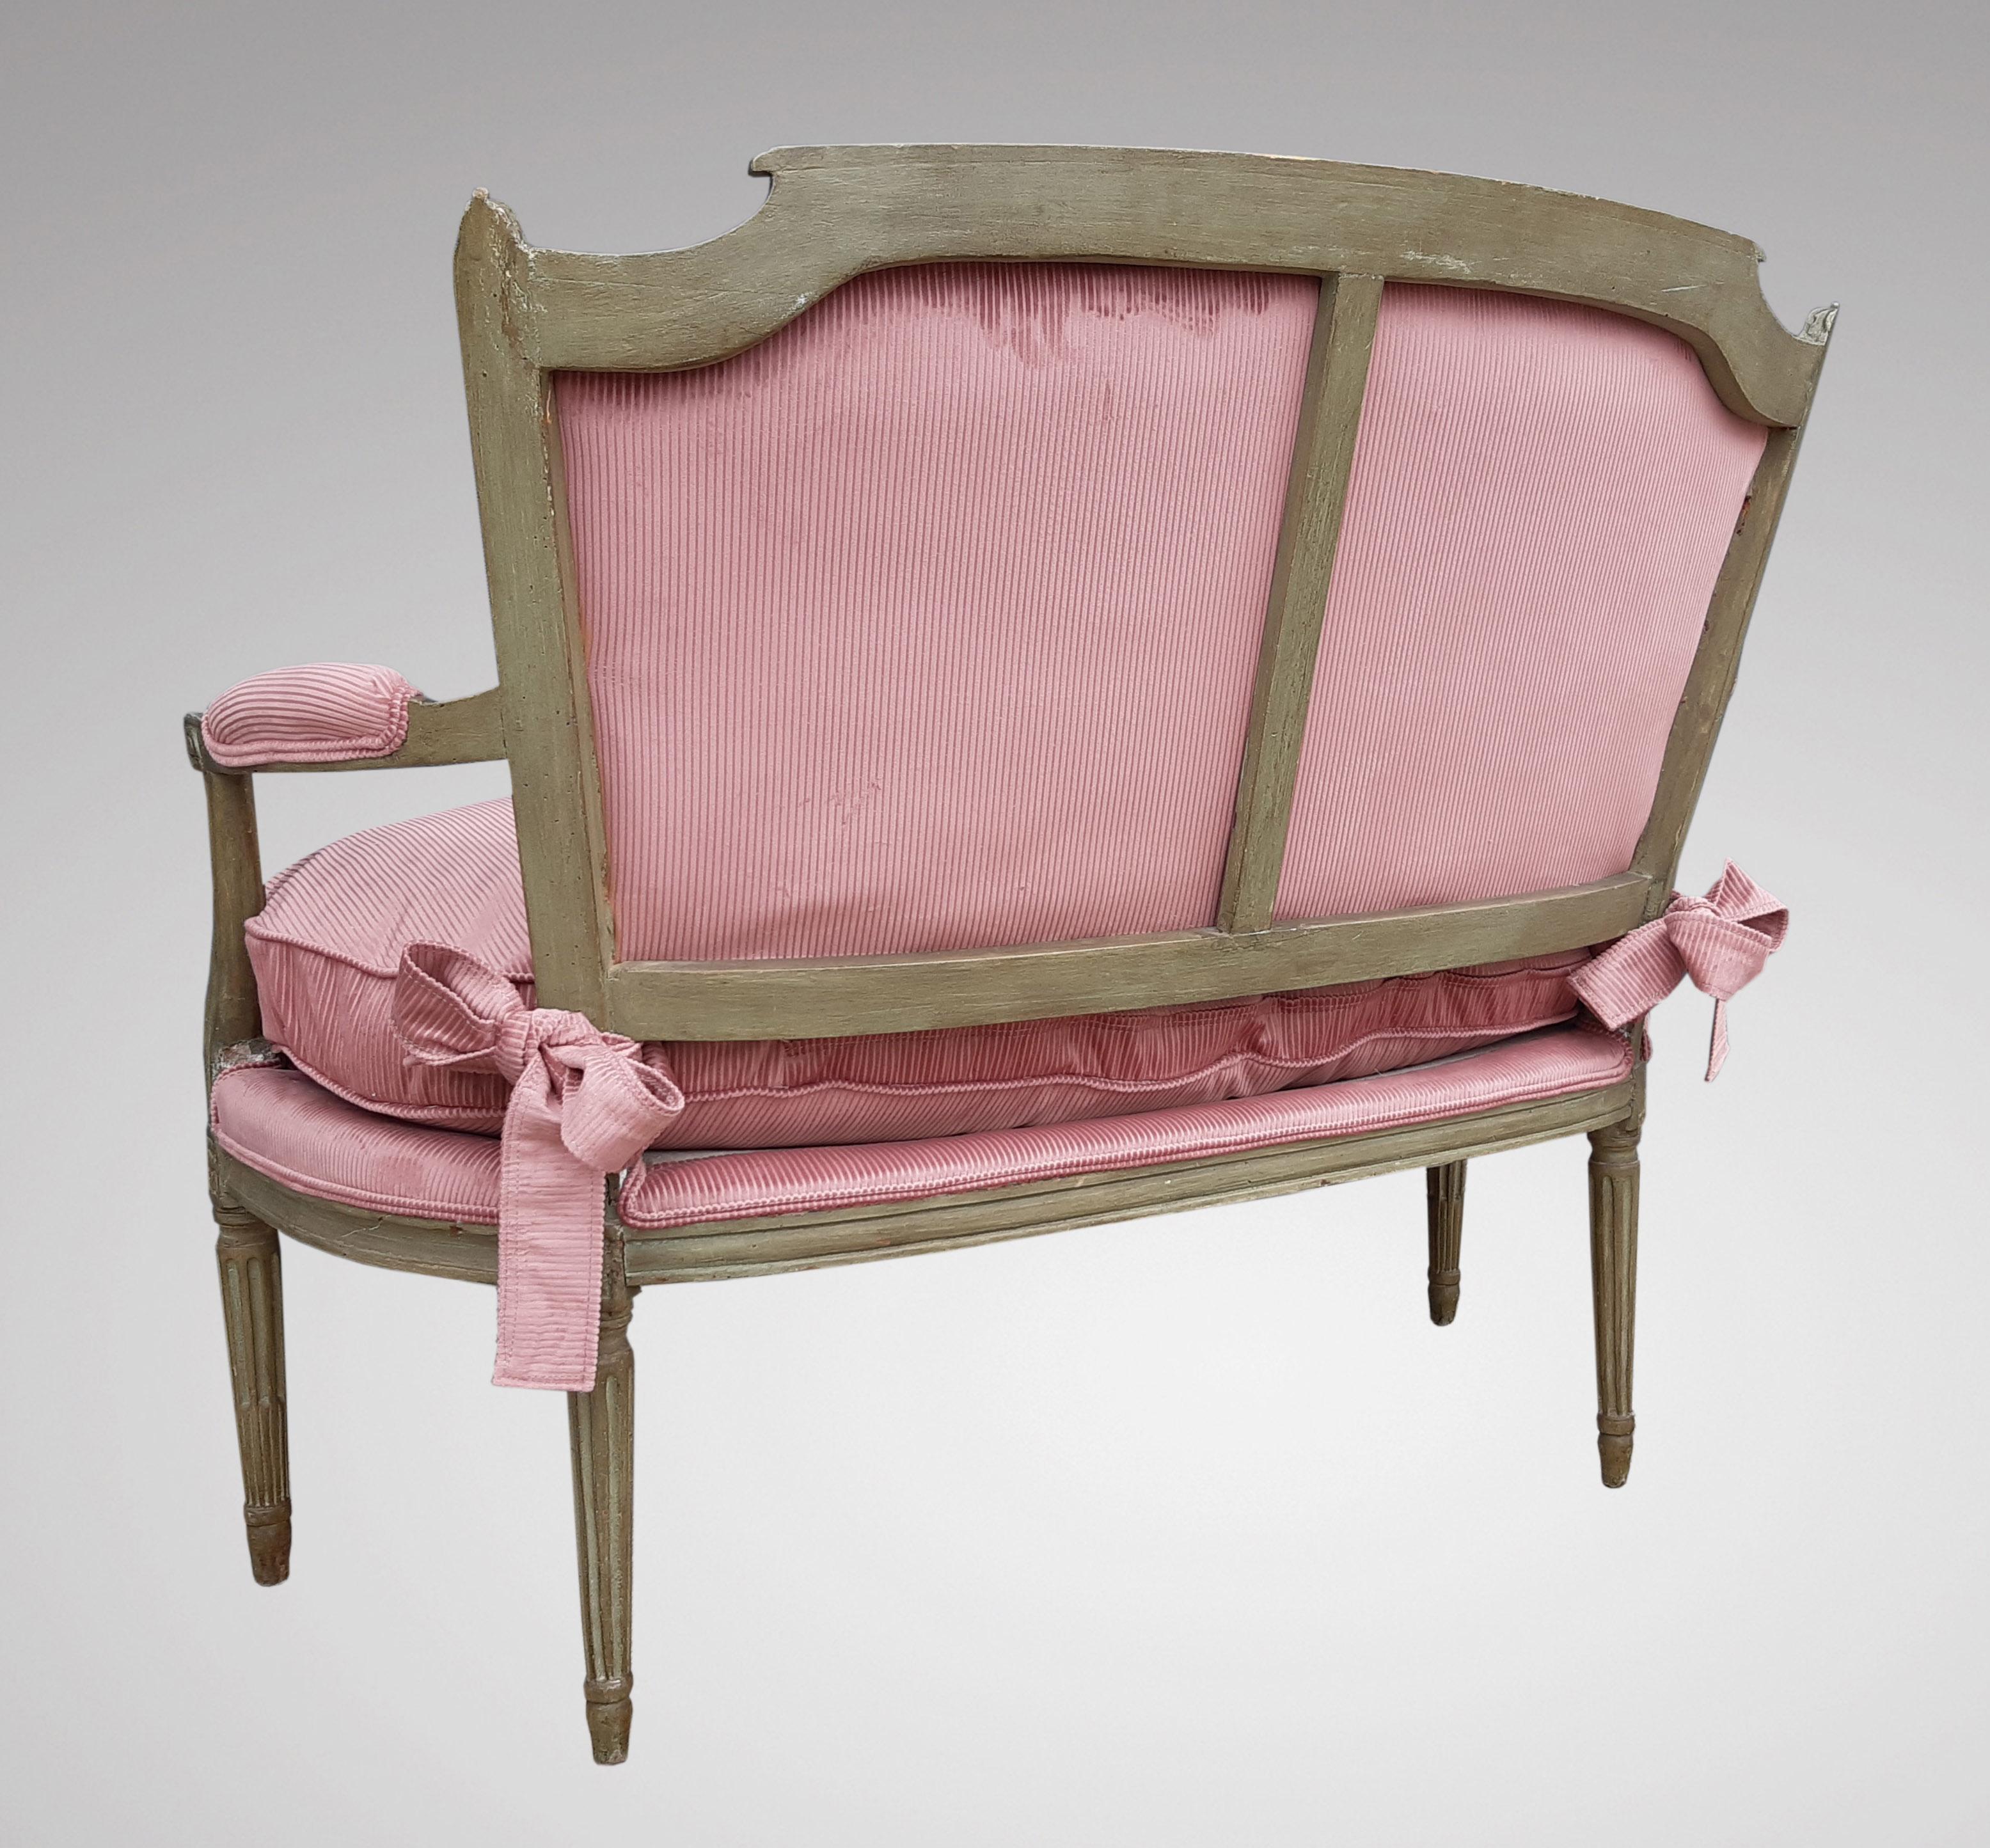 Pretty Louis XVI bench in painted wood, verdigris color, fluted straight legs.
Feather cushion, filled with an old pink velvet, and ending with two pretty bows for a feminine touch.
Completely restored by an upholsterer decorator.